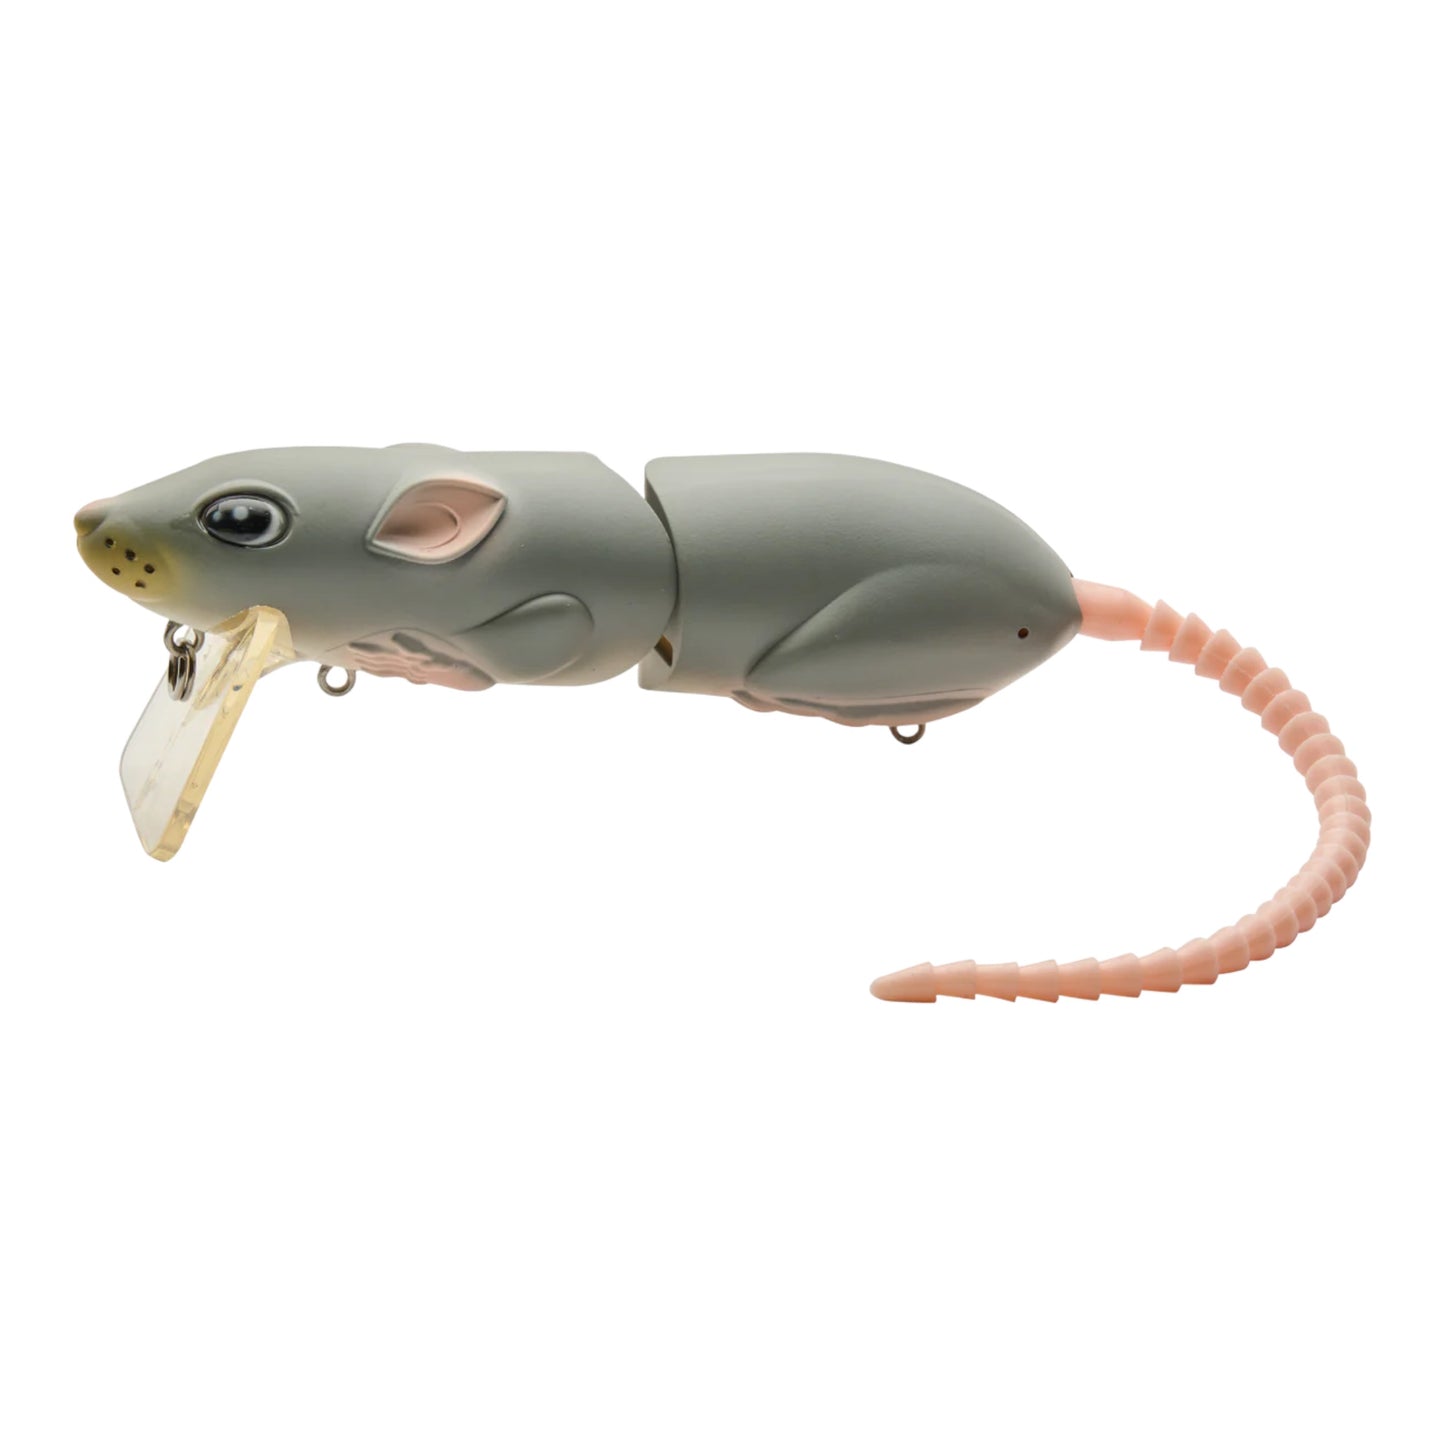 SPRO BBZ-1 RAT 40 Topwater Lure NASTY SHAD COLOR! FREE USA SHIPPING!  #SRT40Z1NSD